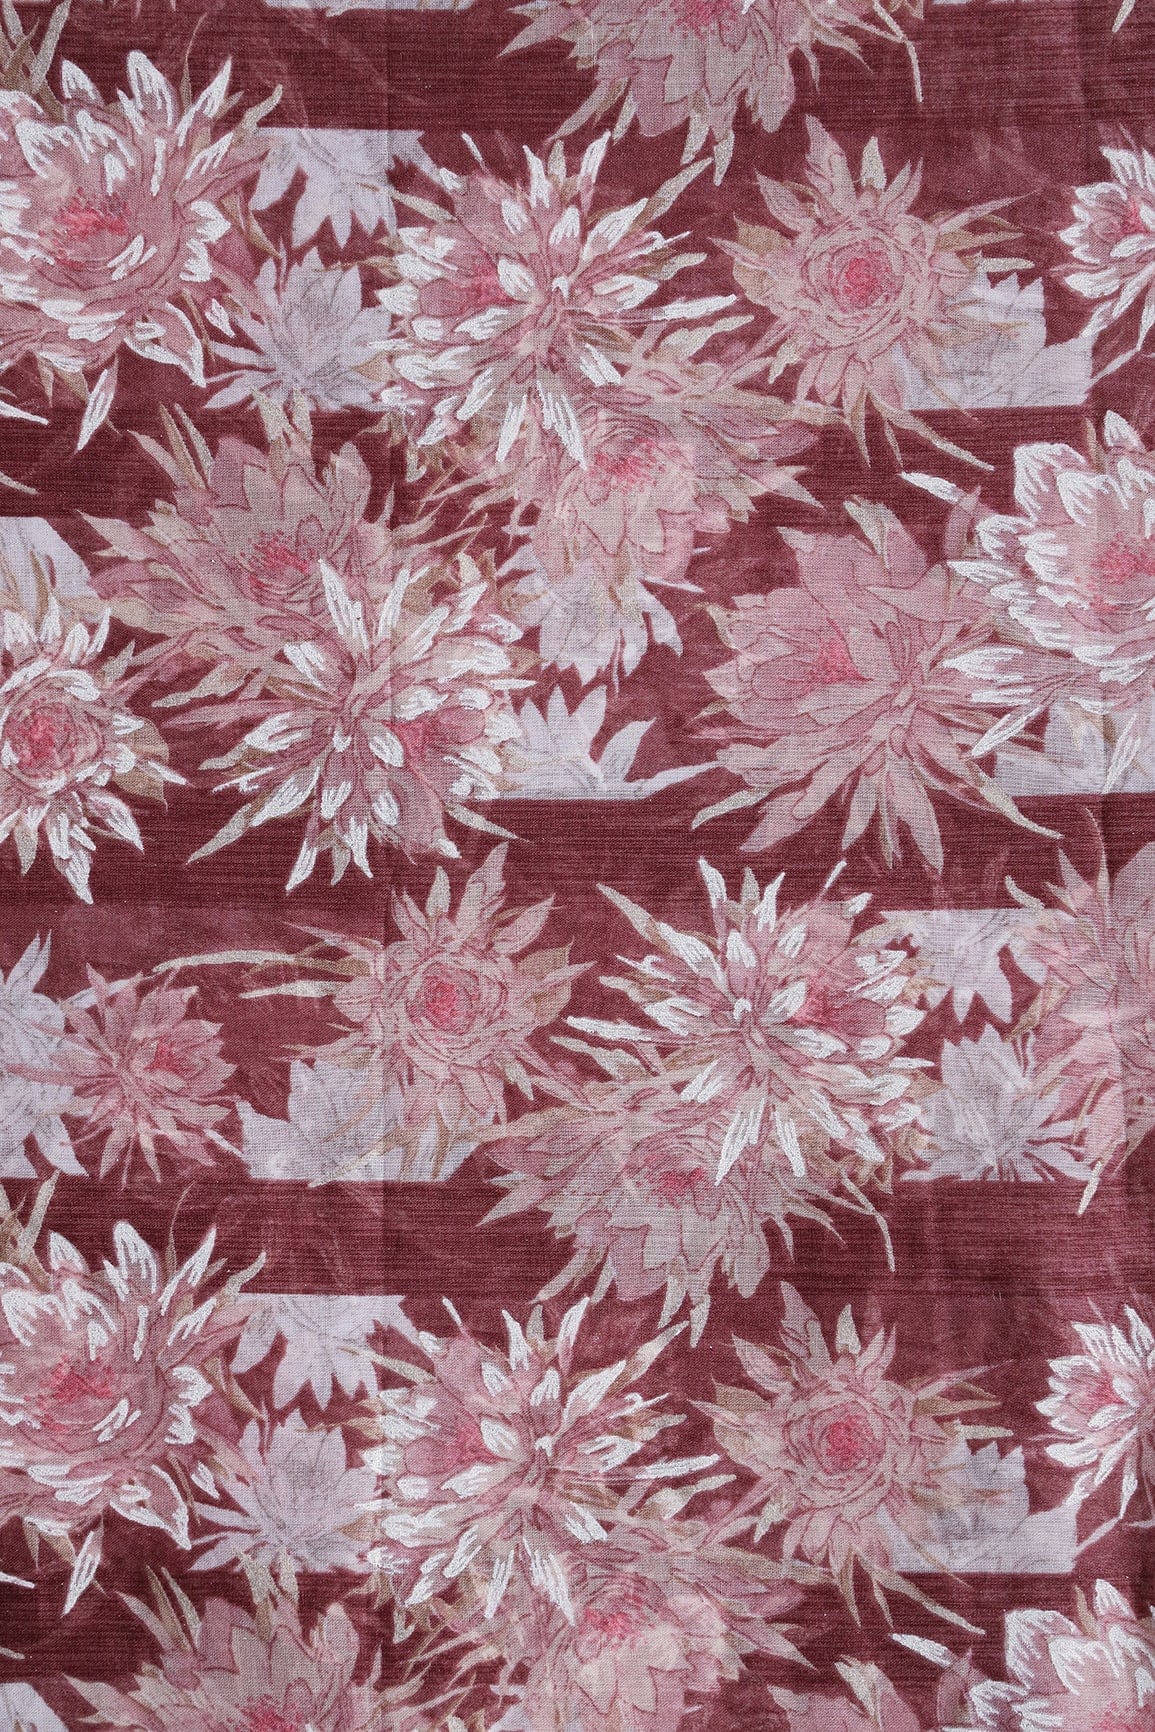 doeraa Prints Light Pink And White Floral Foil Print On Maroon Pure Mul Cotton Fabric